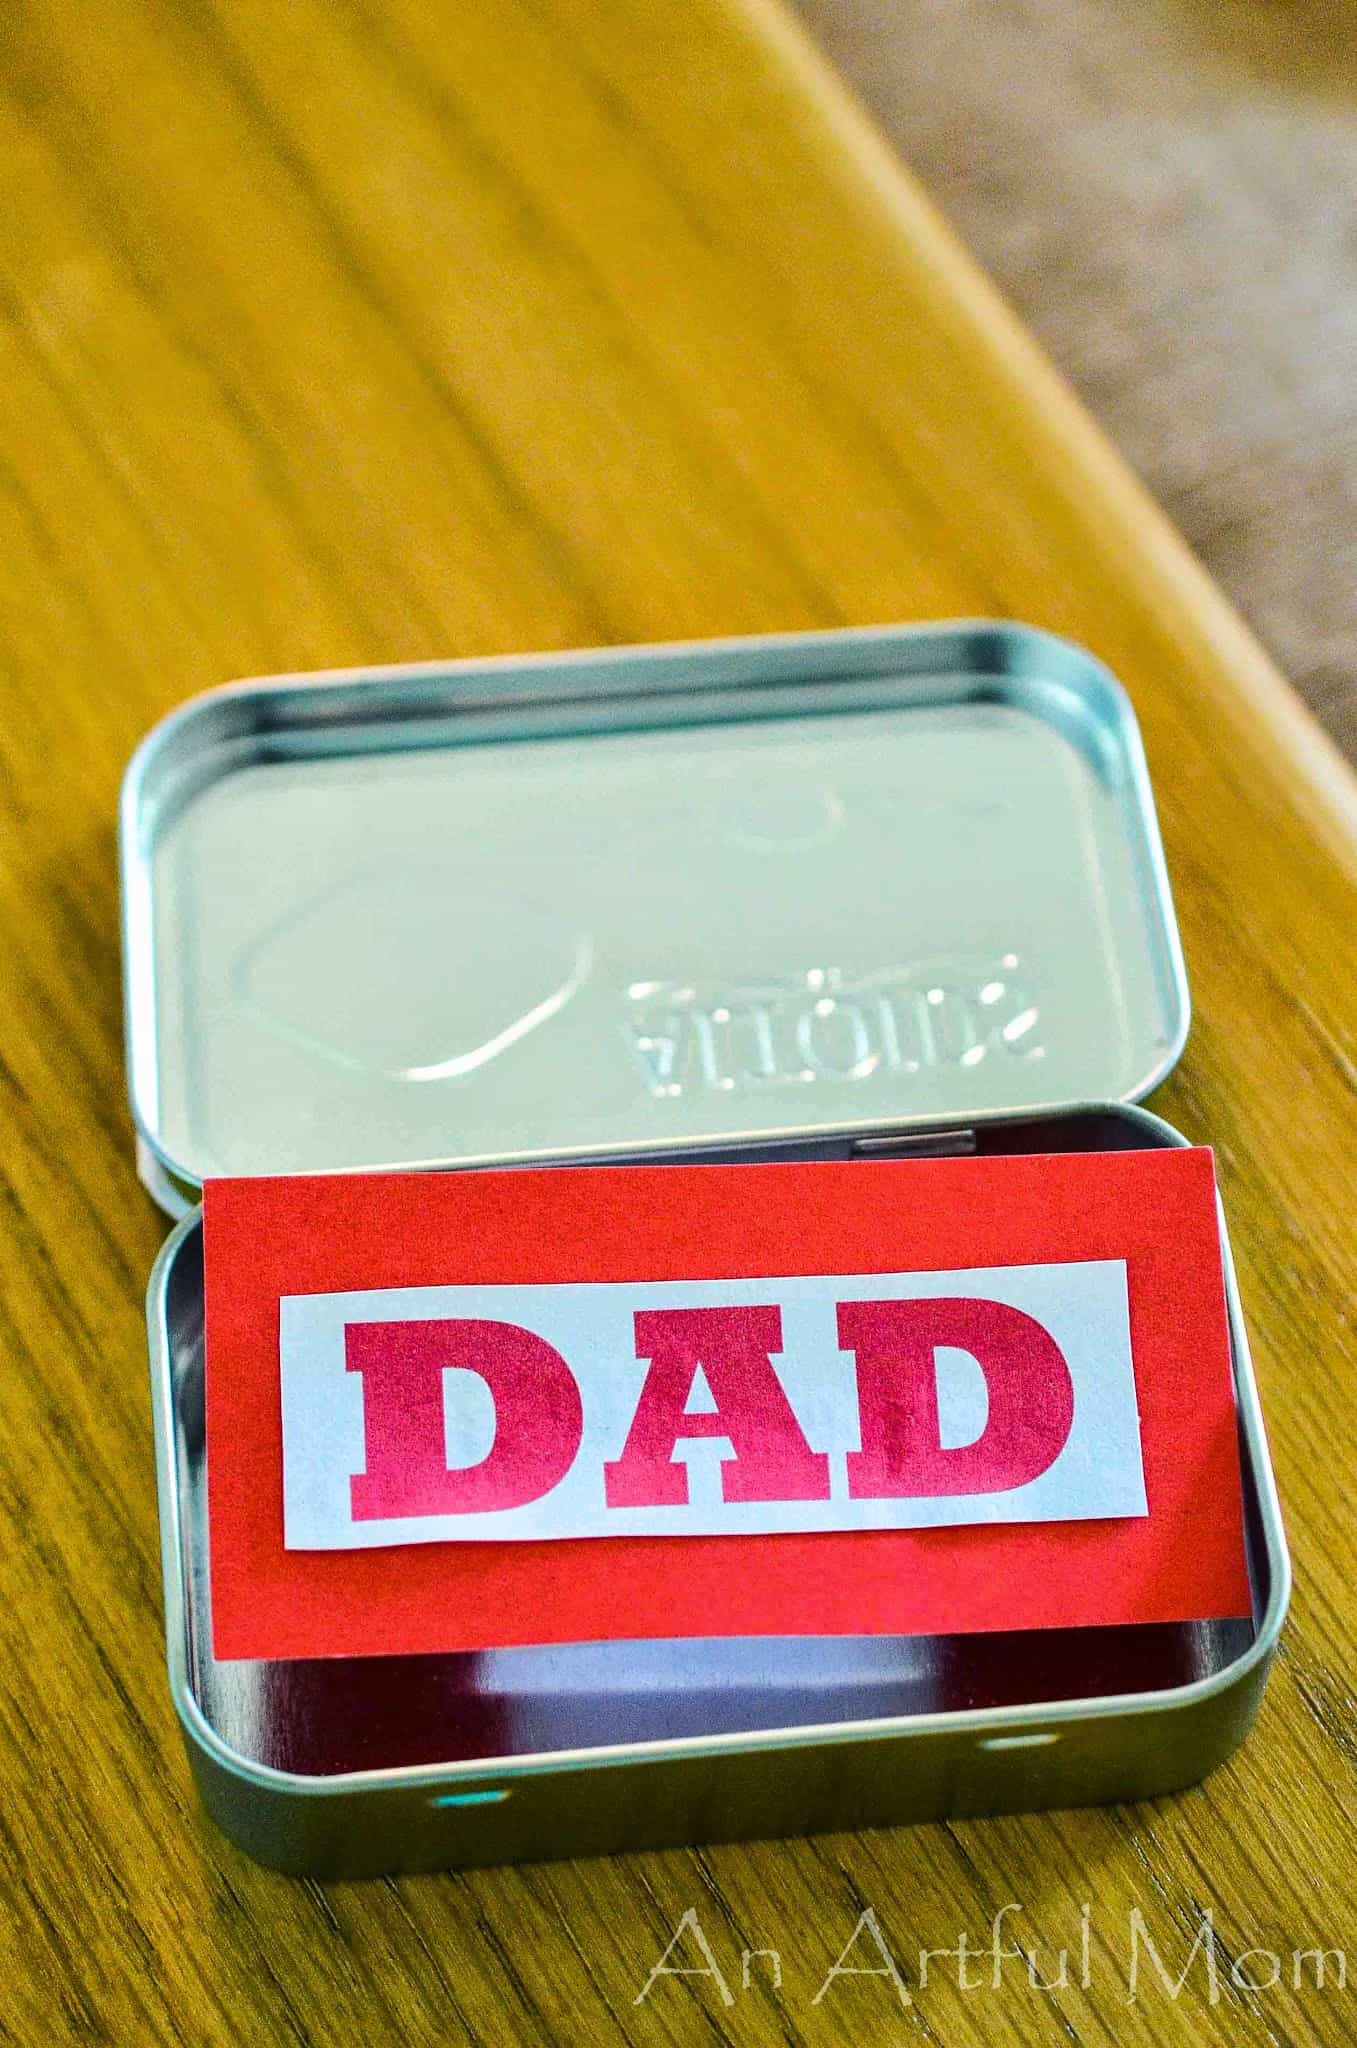 Handmade father's day gift from an Altoids tin